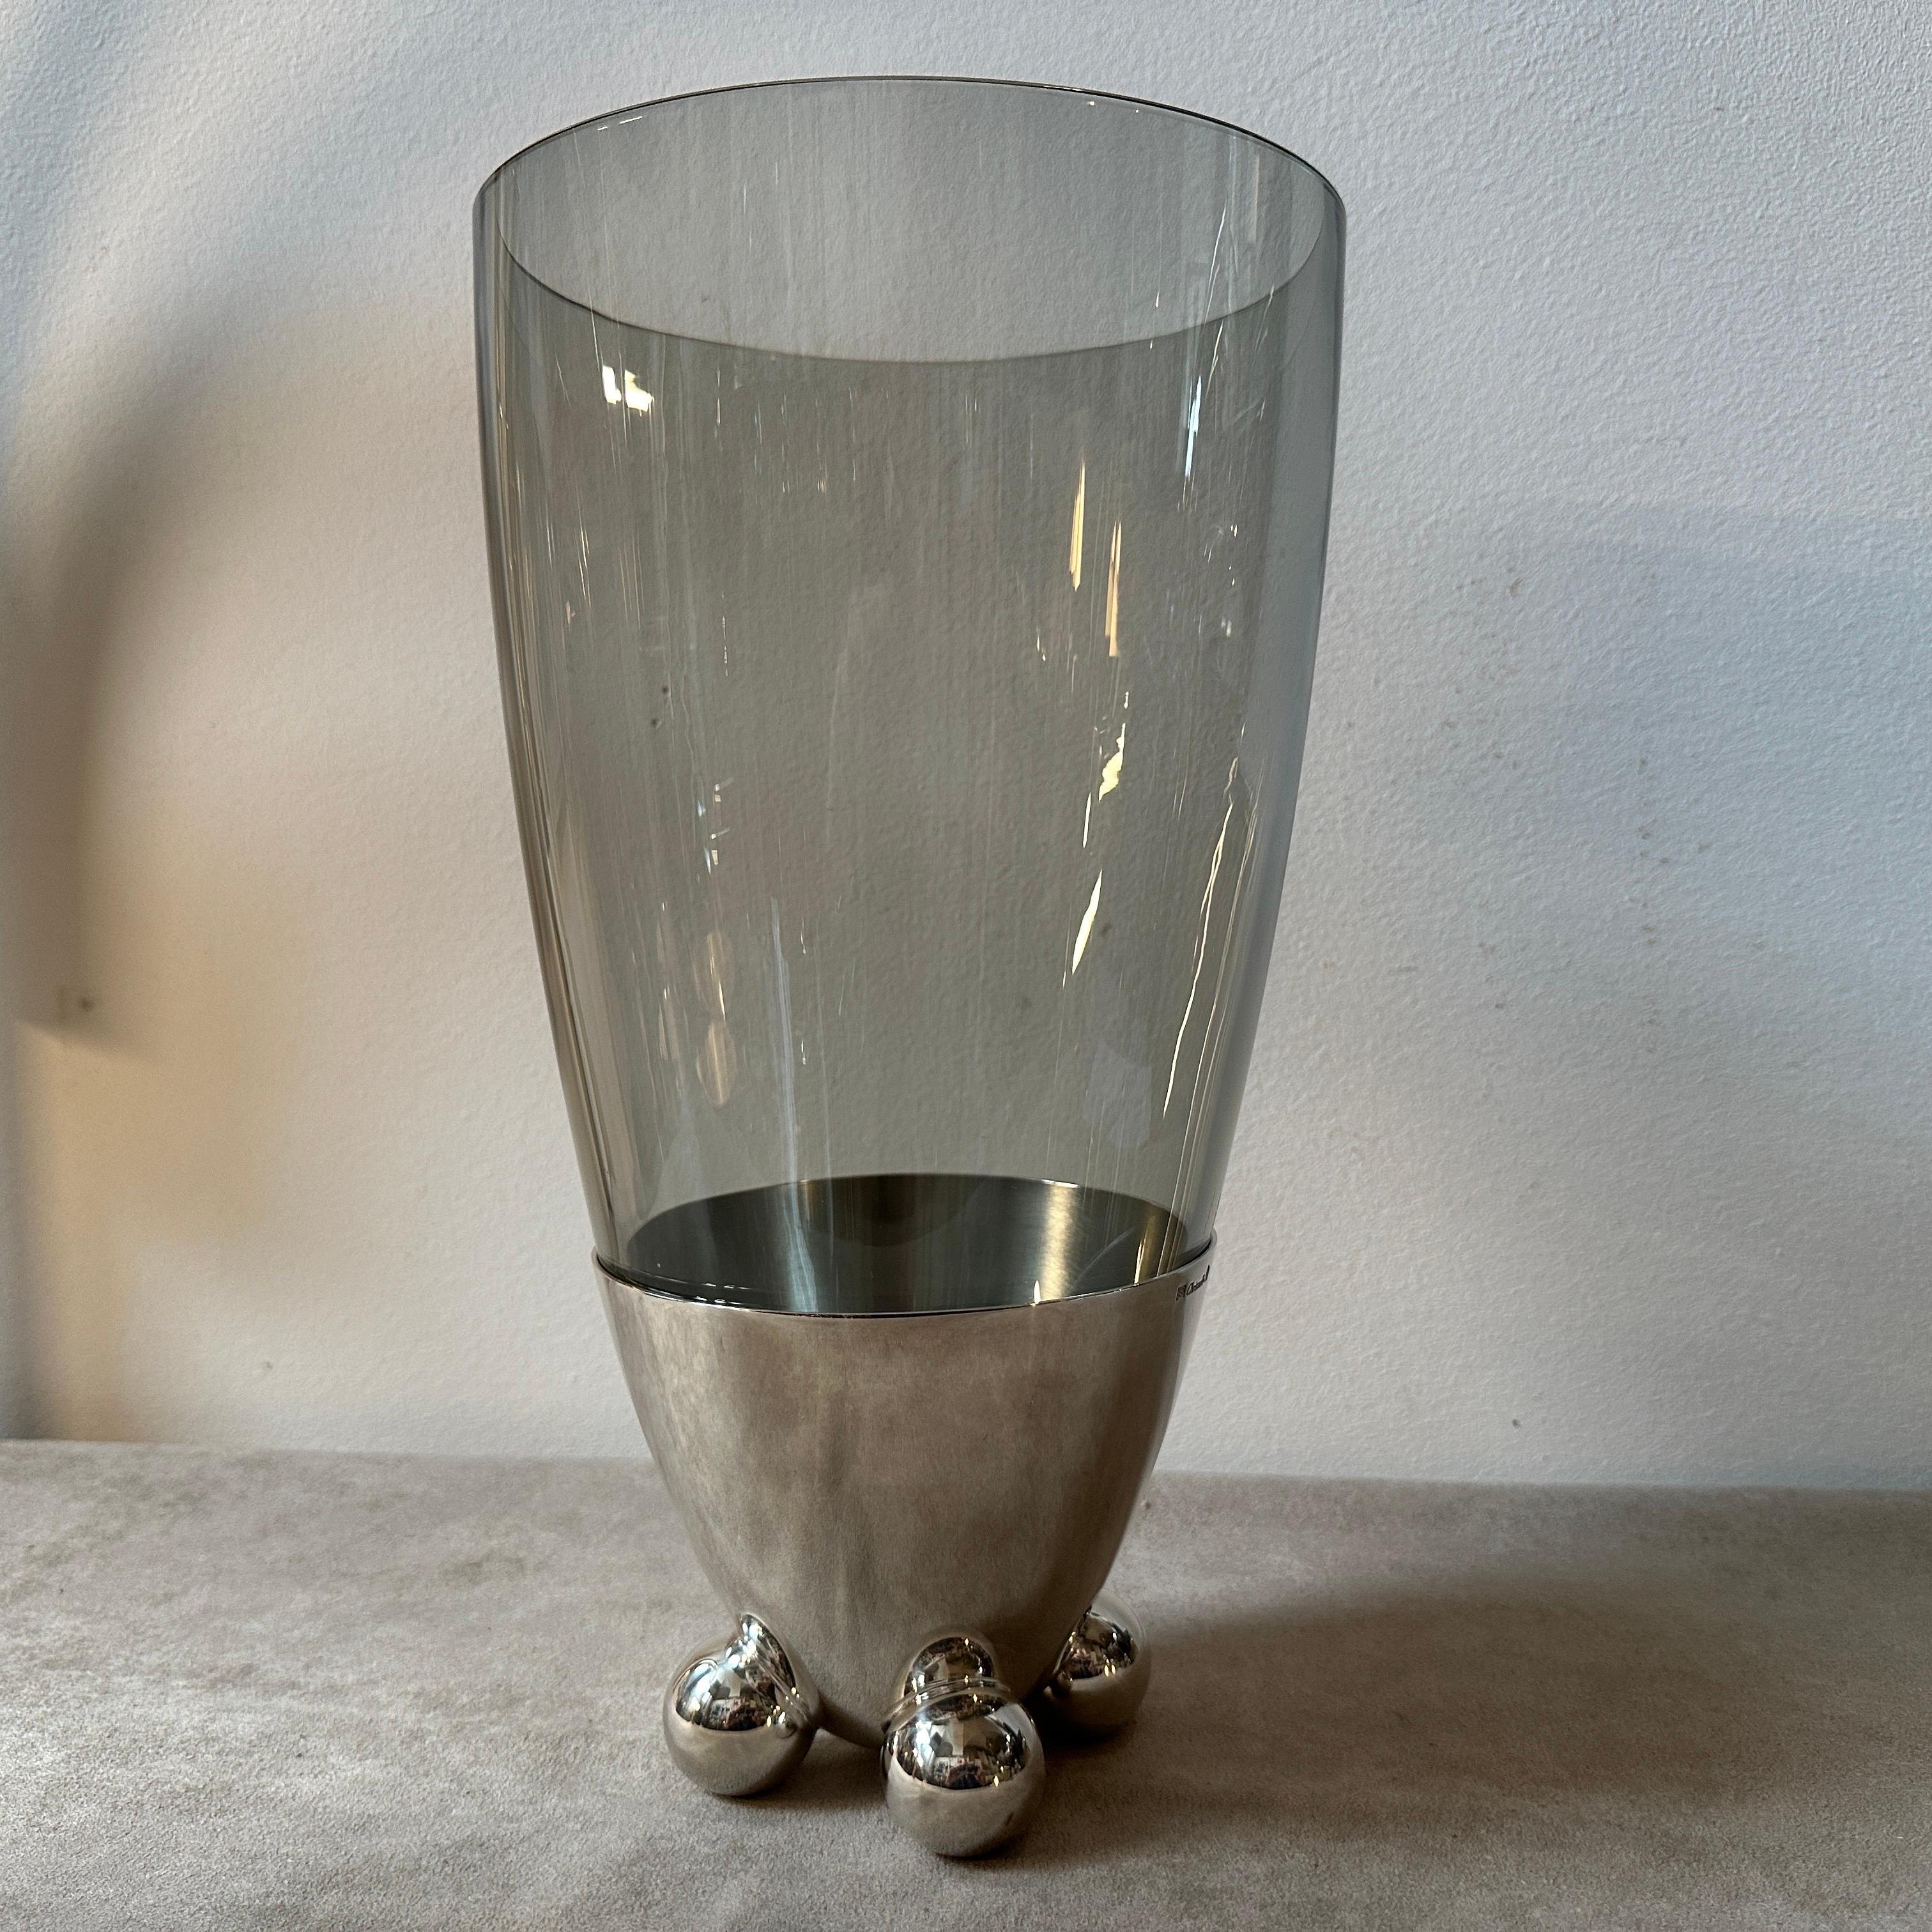 A silver plated and glass vase designed and manufactured in France by Christofle, it has never been used and it came in original box. Richard Hutten, a renowned Dutch designer known for his innovative and playful approach to design, collaborated